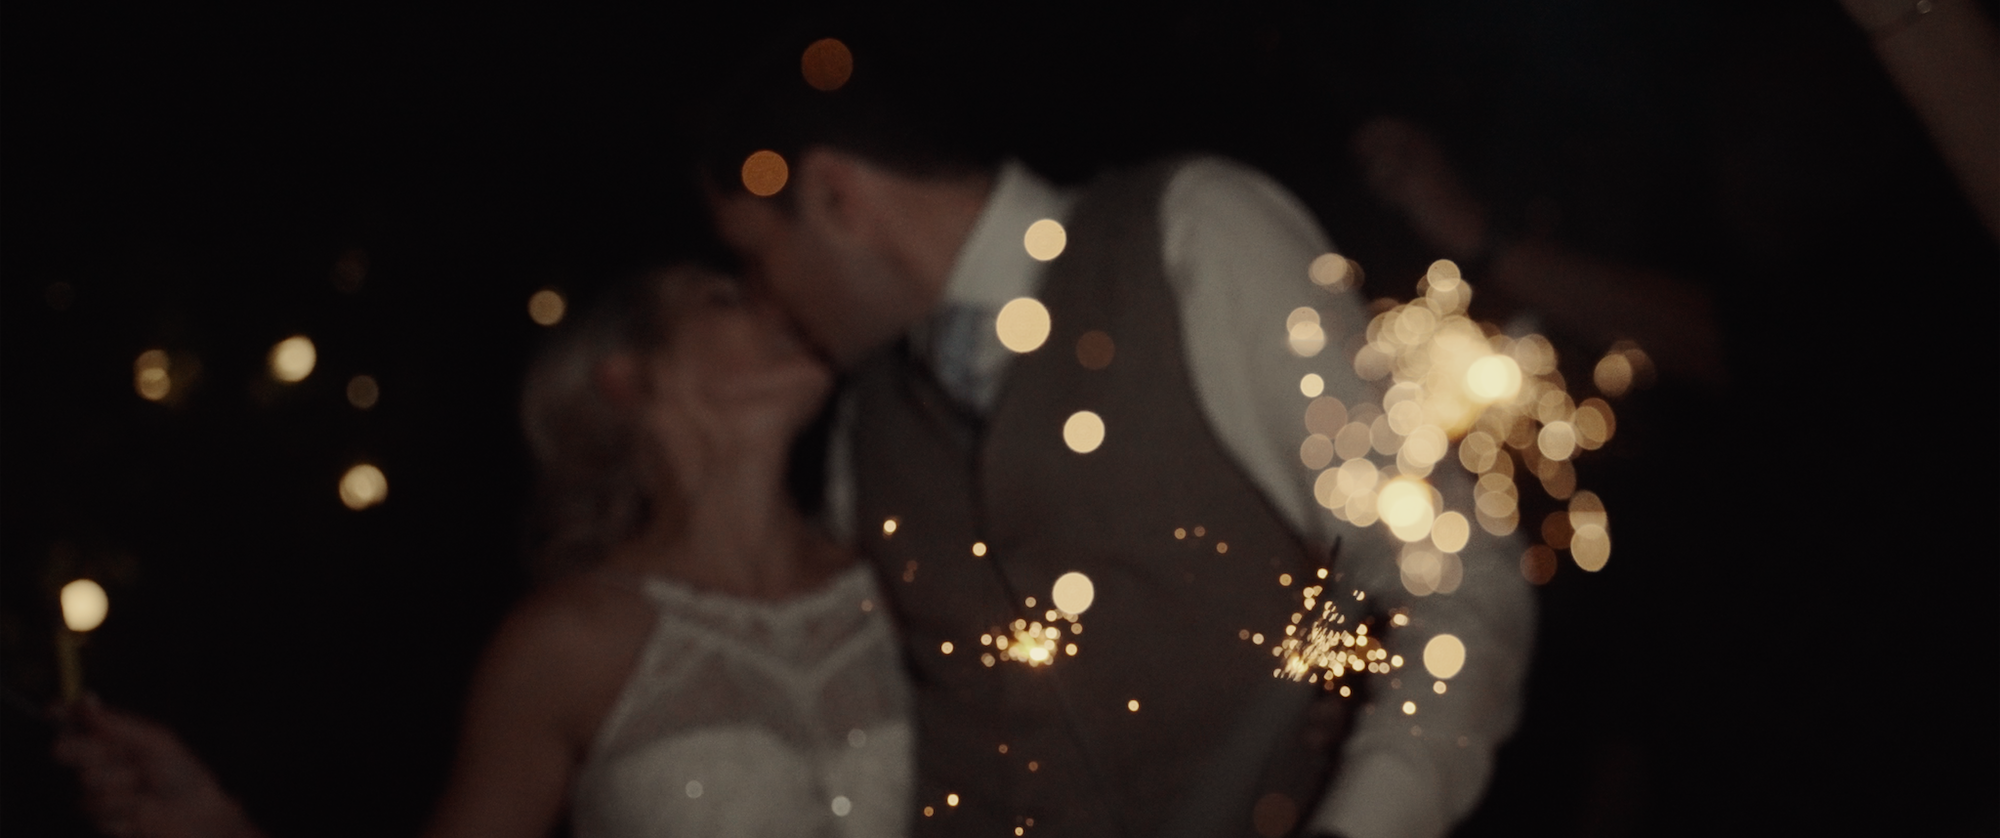 Oxwich Bay Hotel Wedding Videography by Ben Holbrook Films (Swansea South Wales).jpeg46.png